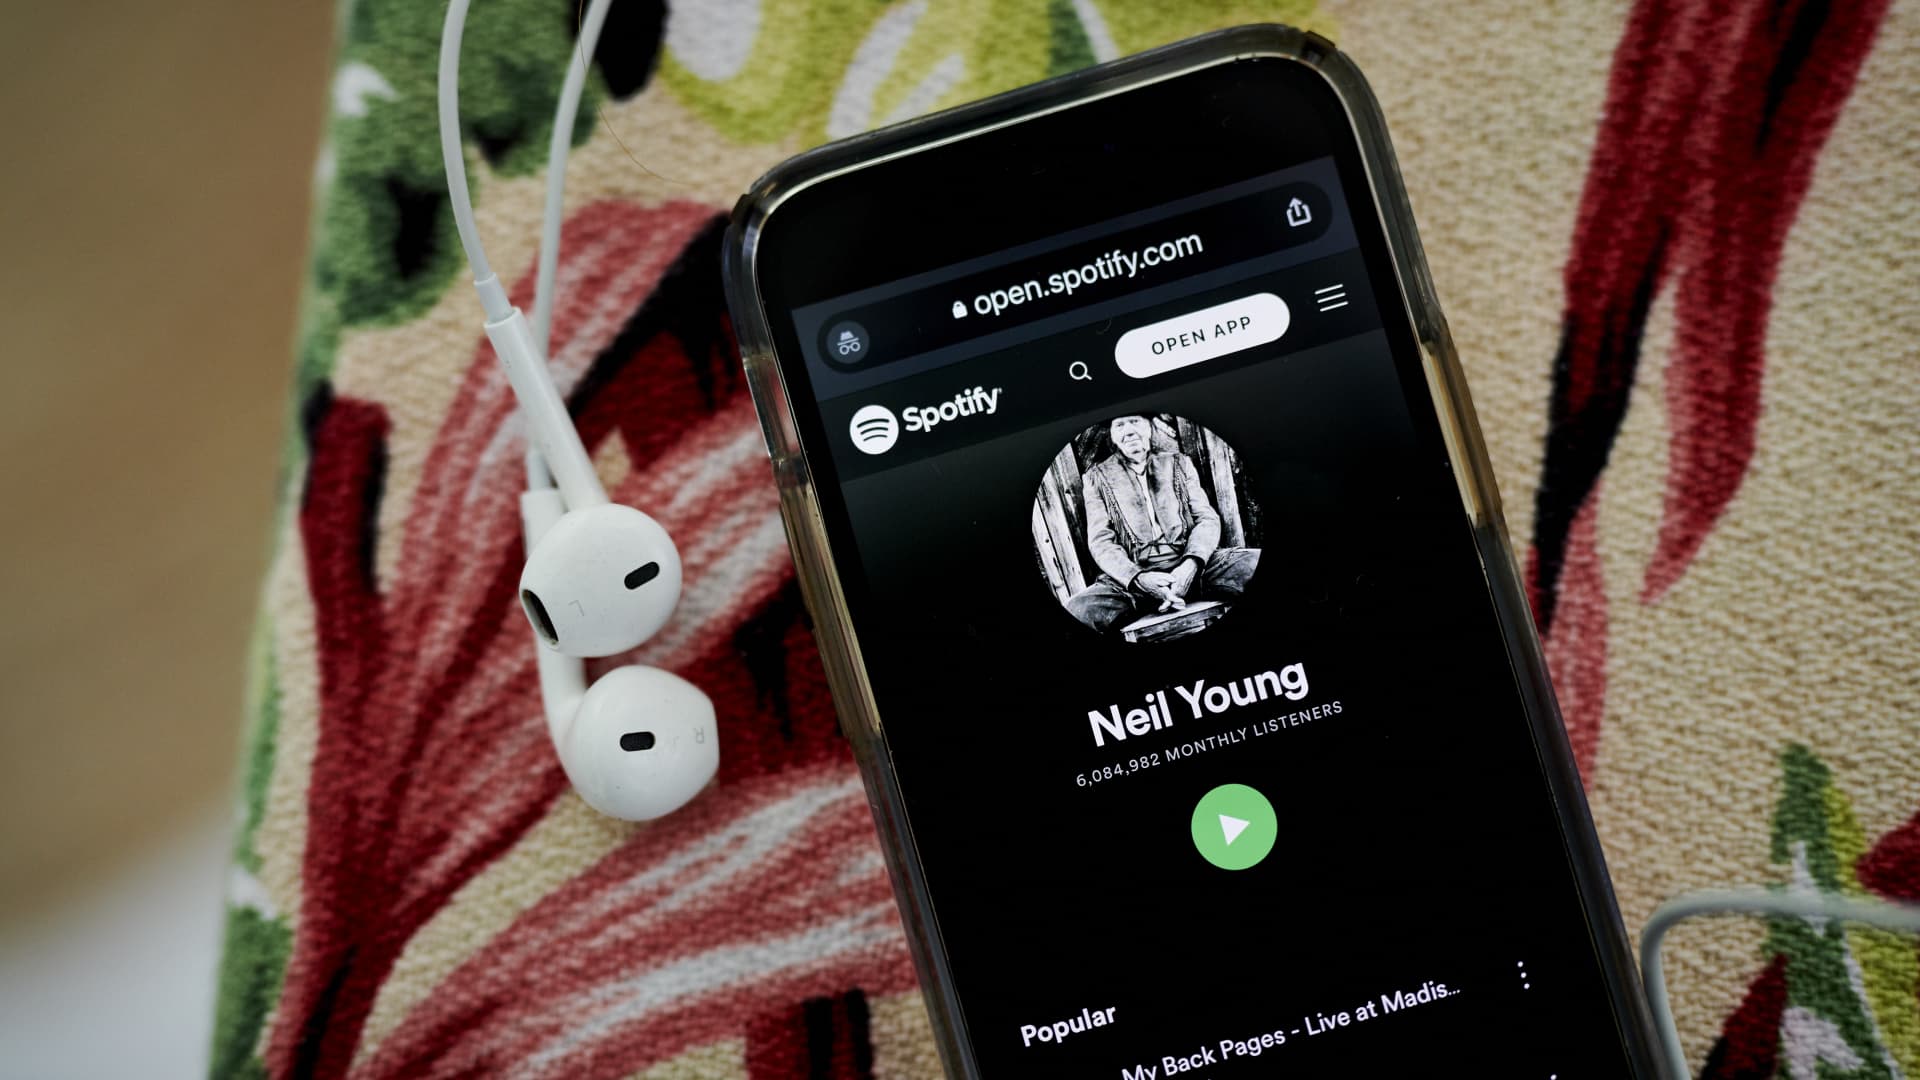 Neil Young Spotify website on smartphone in Saint Thomas, US Virgin Islands, on Sunday, January 30, 2022.